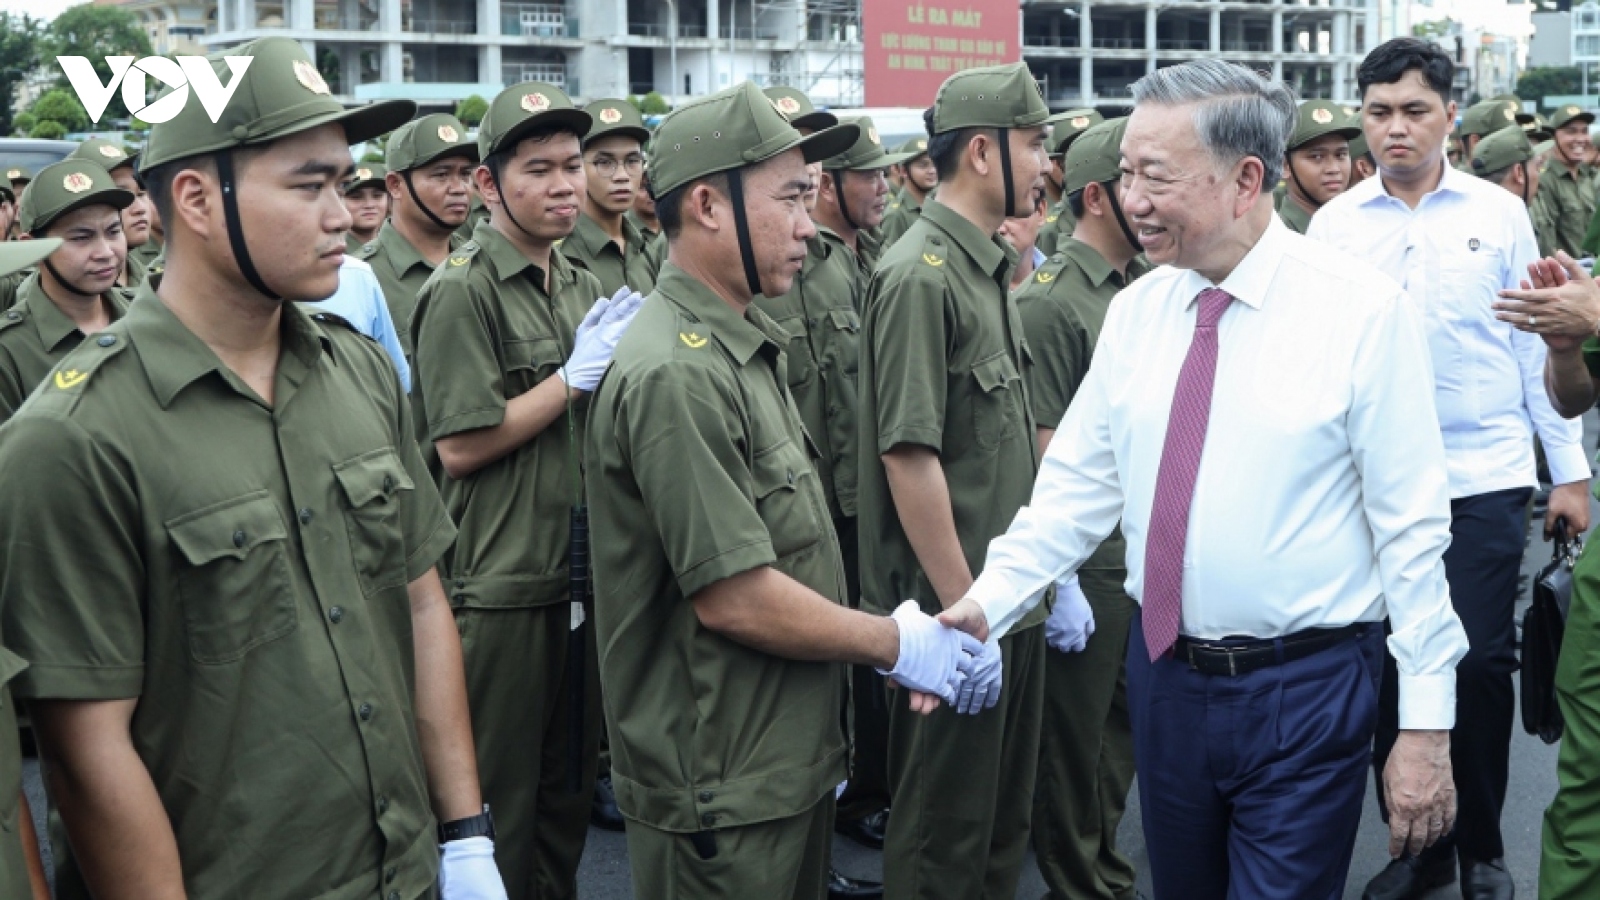 Grassroots-level security and order protection forces debut in Vietnam